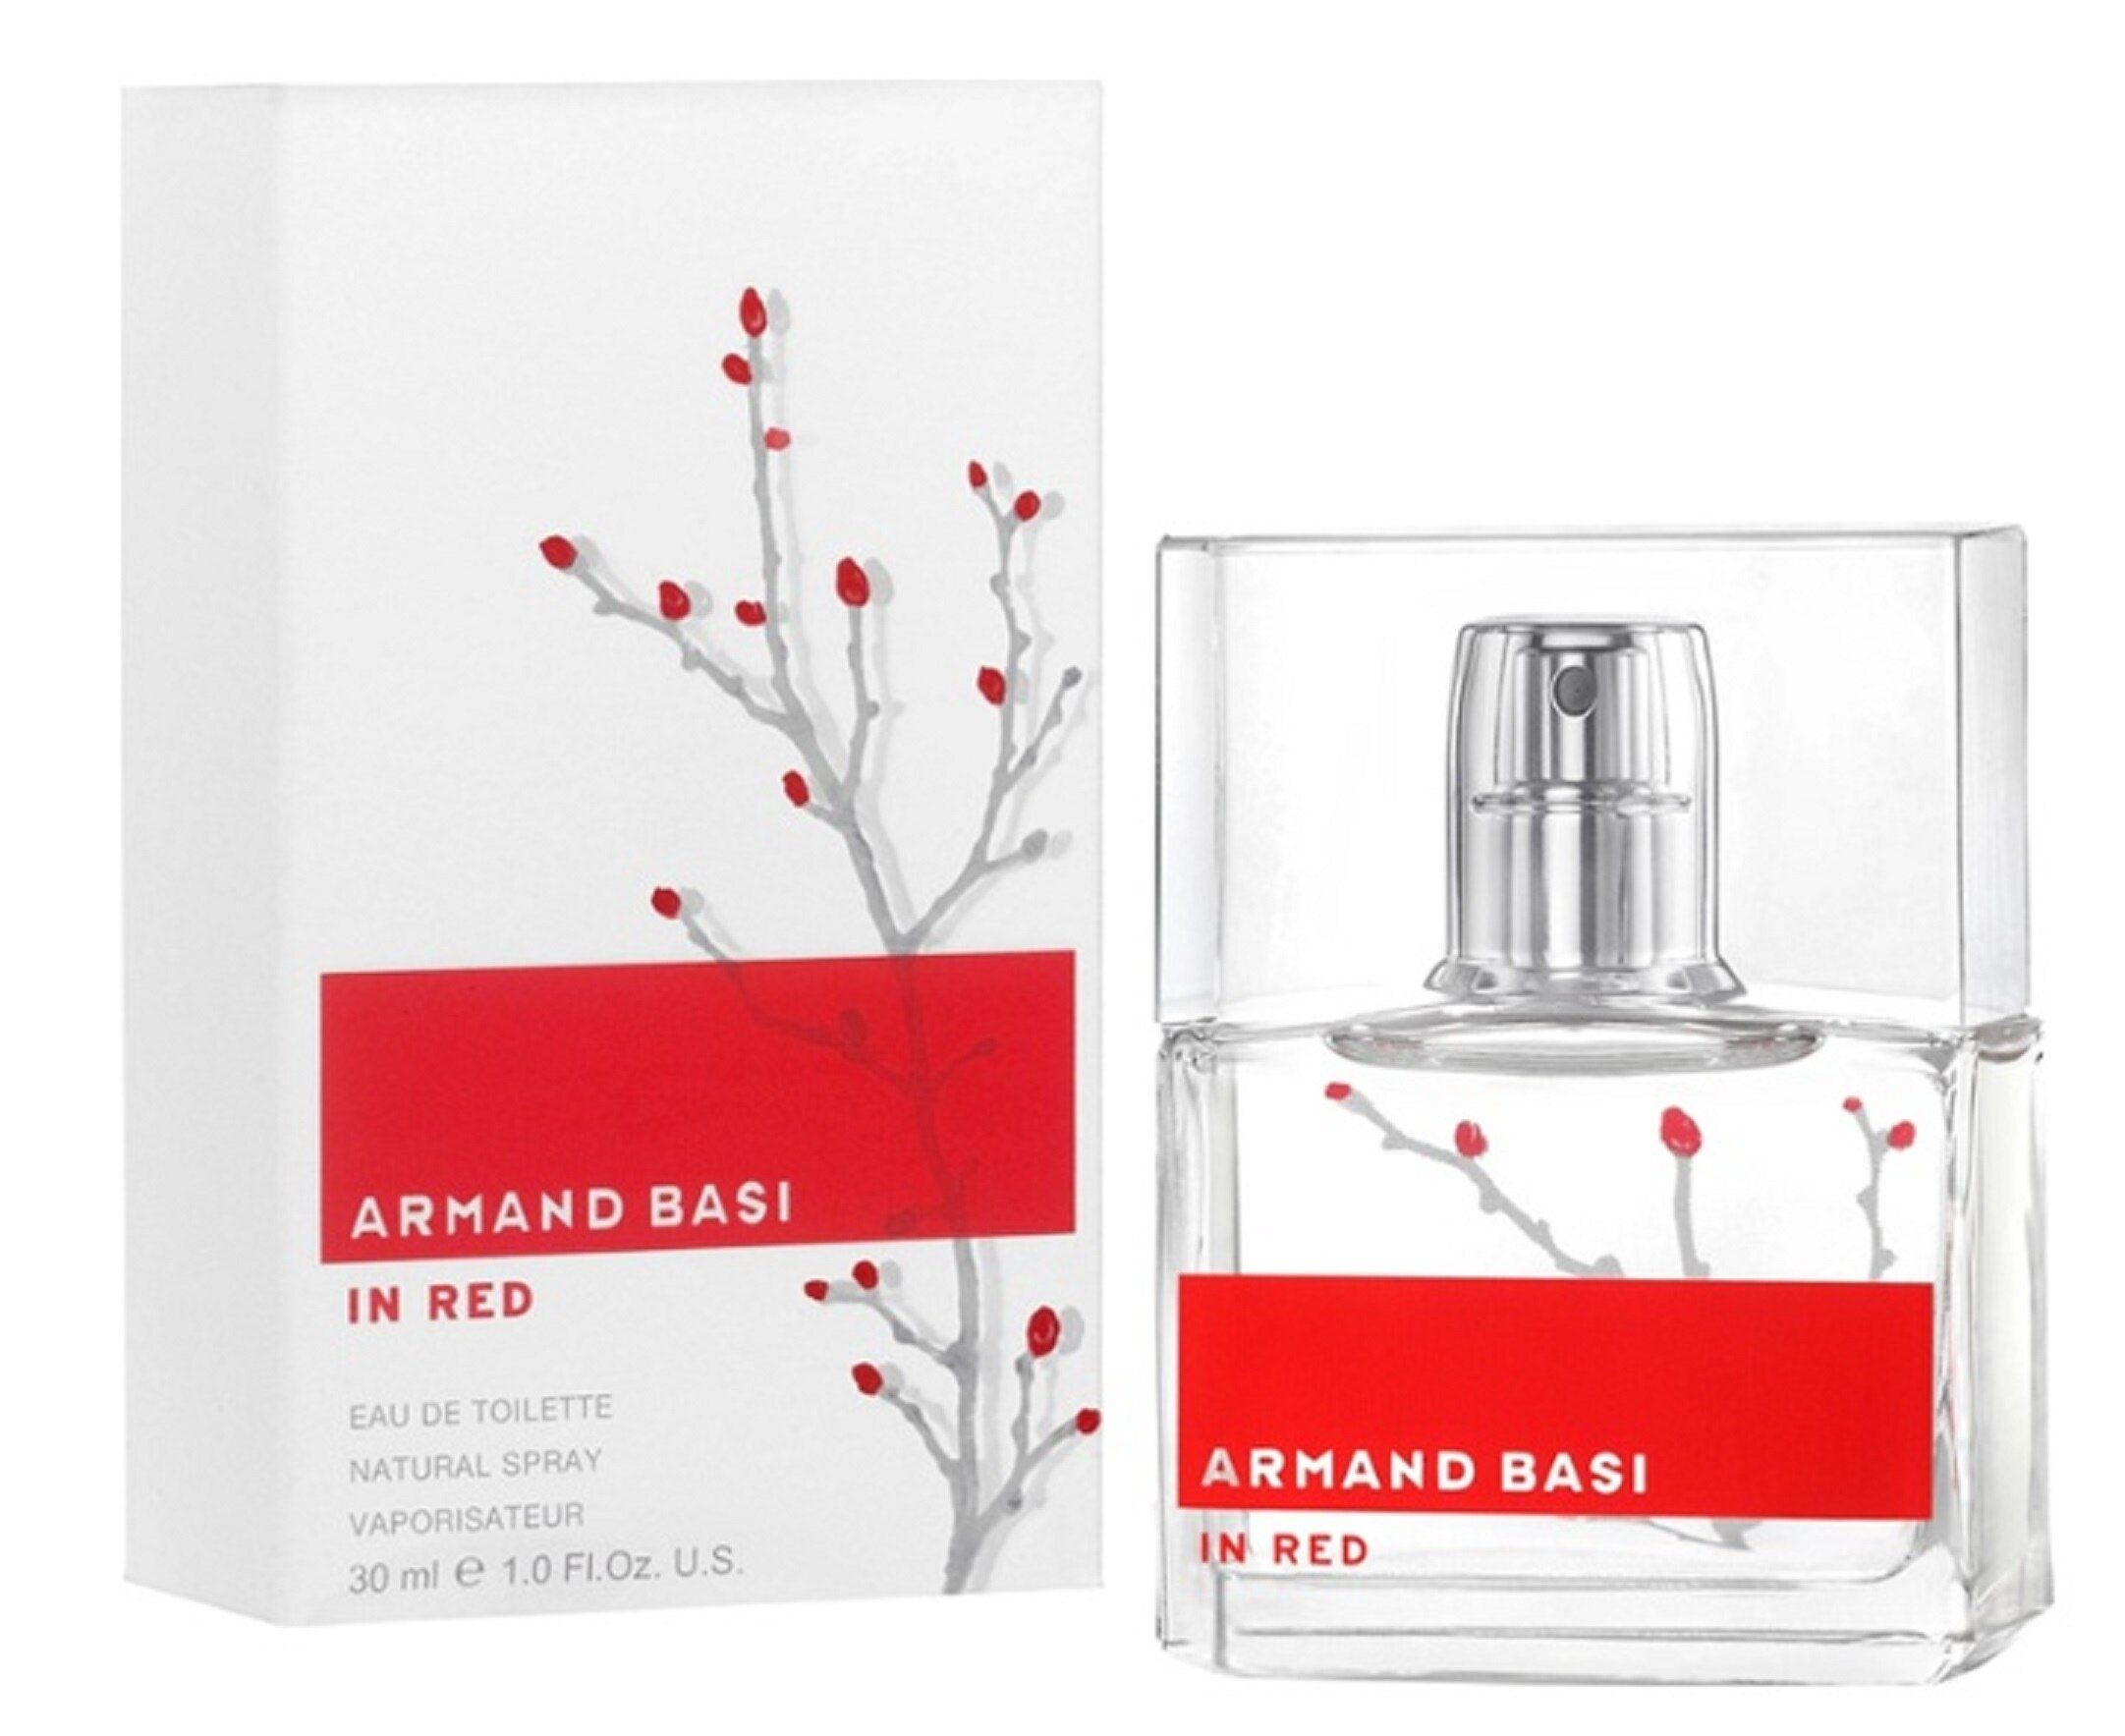 Туалетная вода basi in red. Арманд баси духи женские. Armand basi in Red 30 мл. Armand basi in Red (l) 30ml EDT. Armand basi in Red for women EDT 30 ml Original.